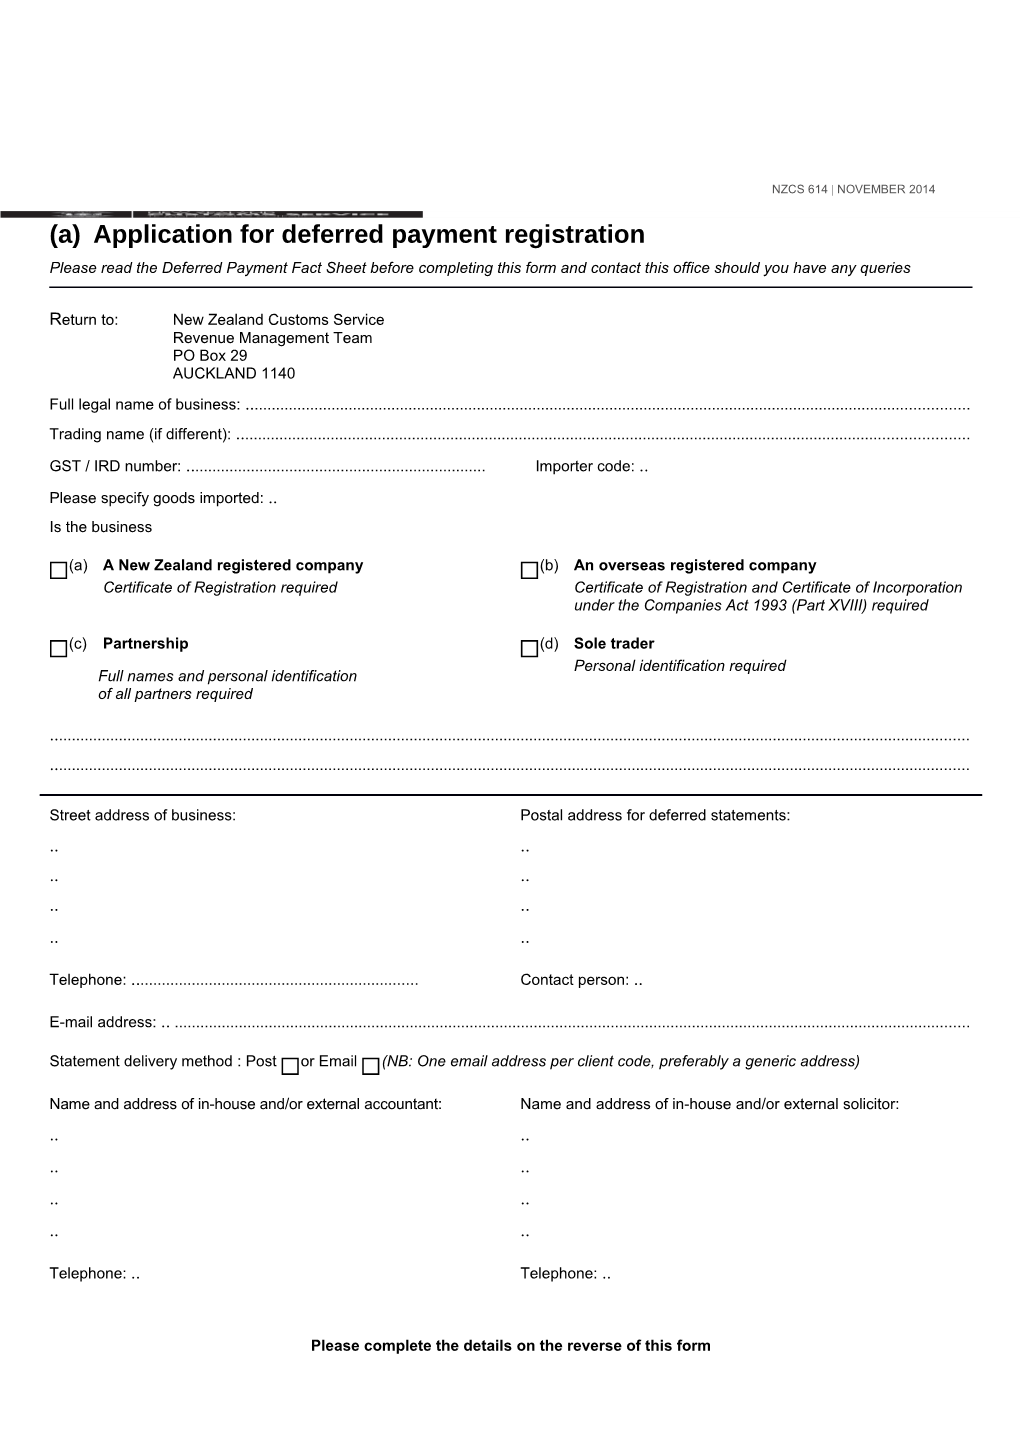 NZCS 614 - Application for Deferred Payment Registration